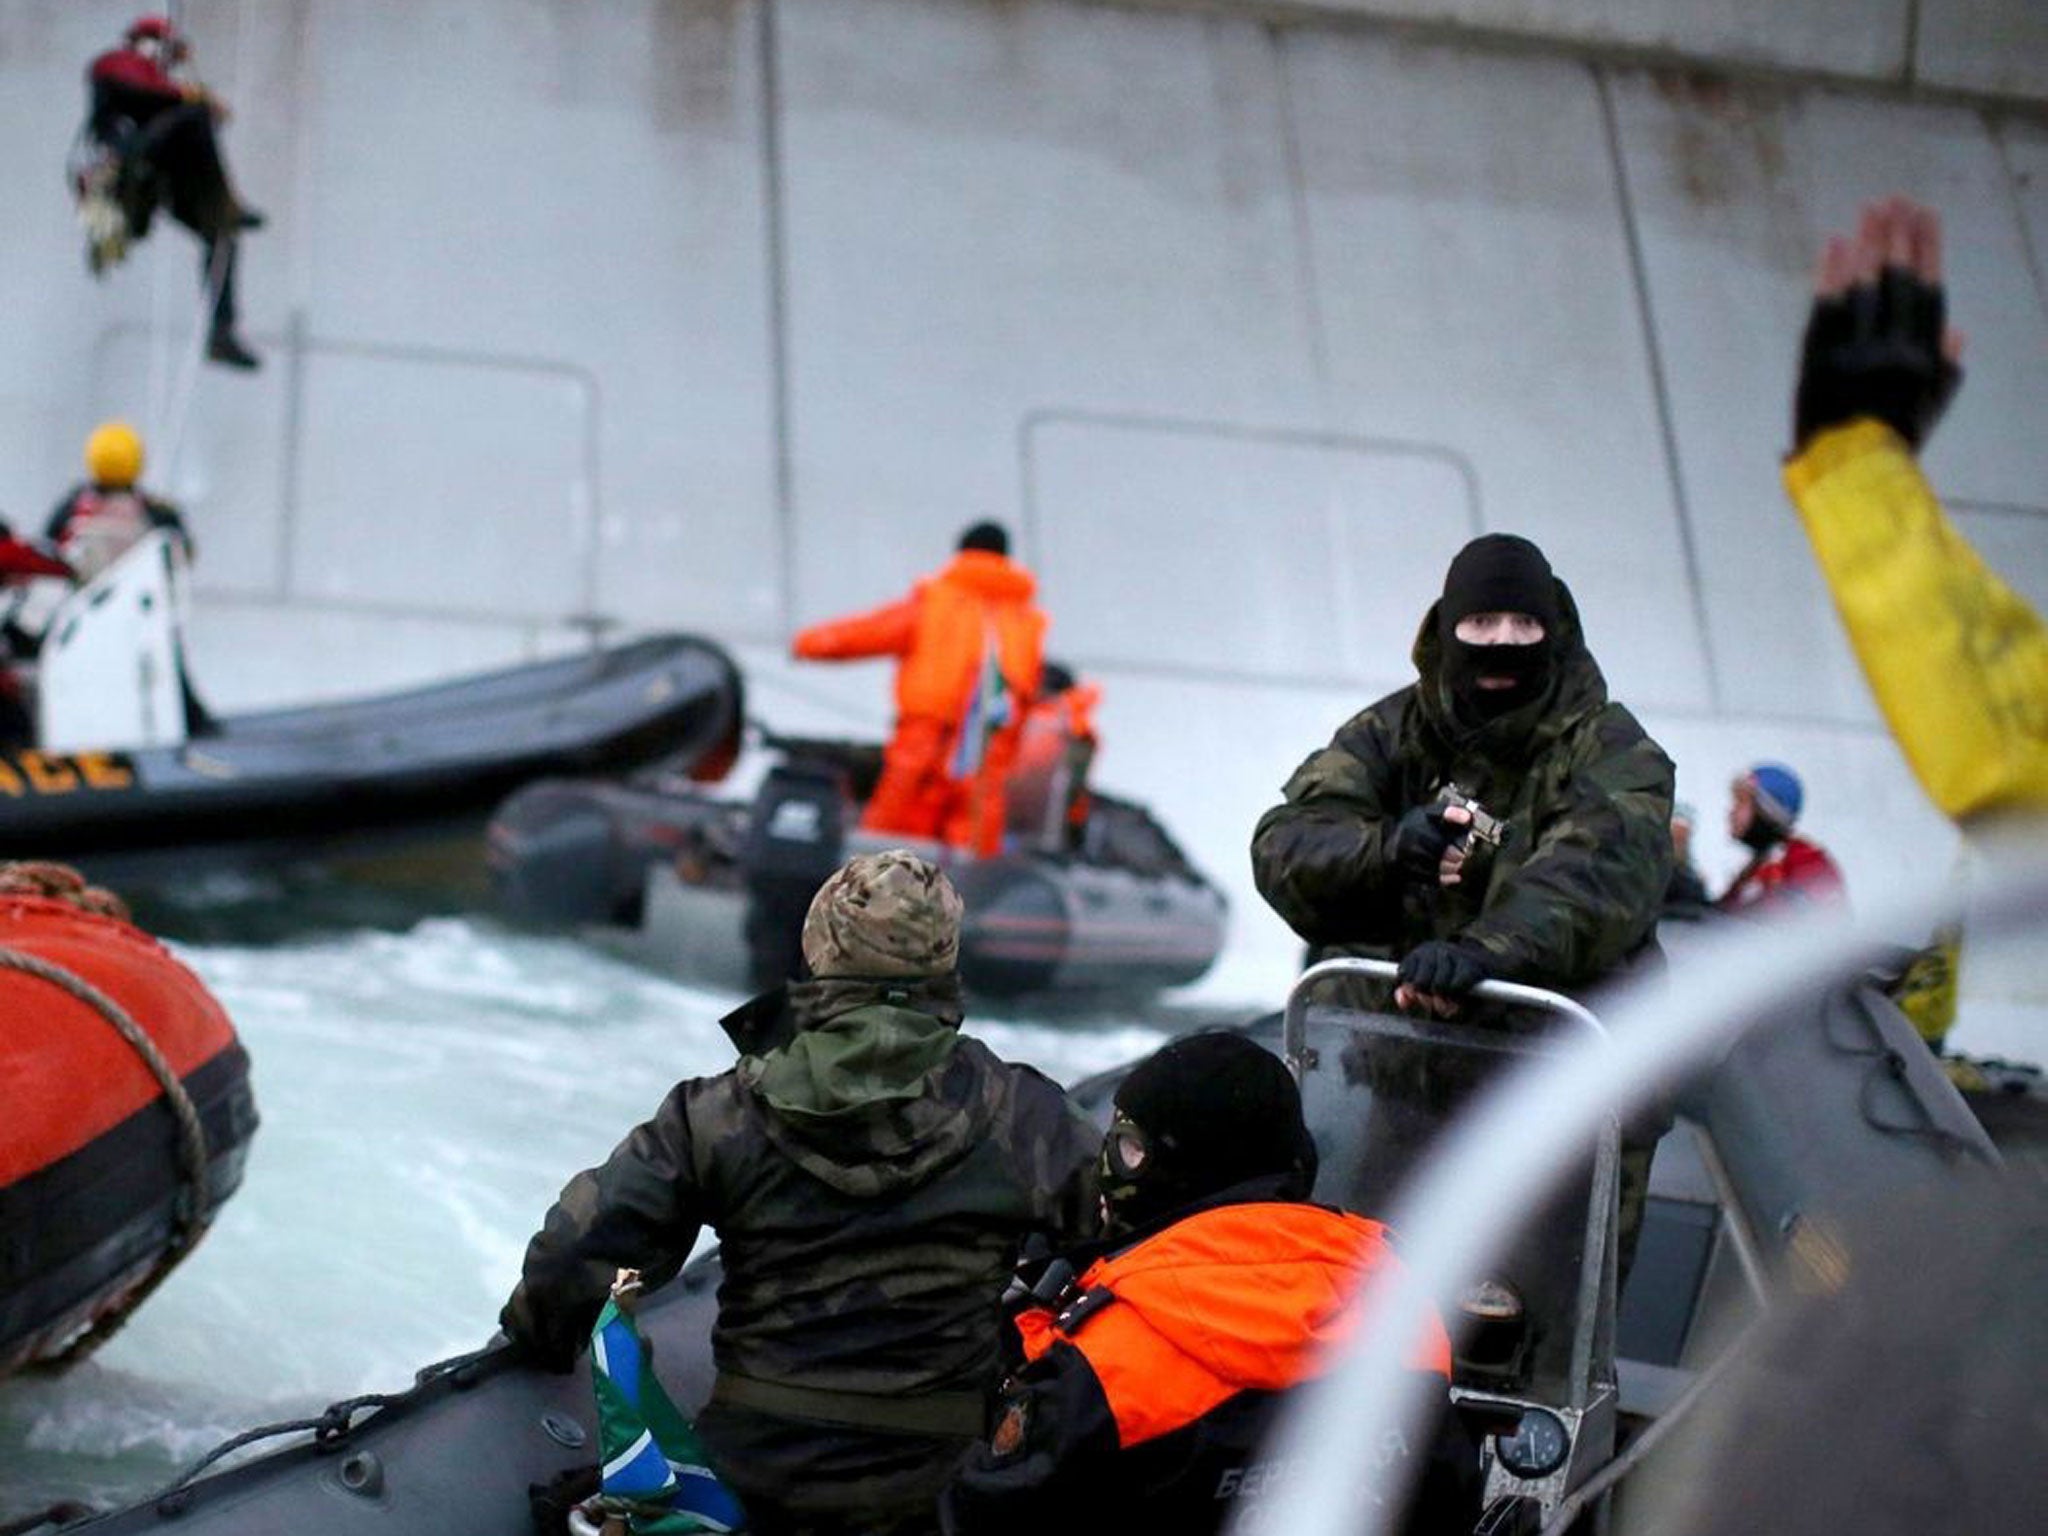 Greenpeace took this photo of a camouflaged officer from the Russian Coast Guard pointing a gun at an activist during an attempt to scale an Arctic oil rig on Wednesday